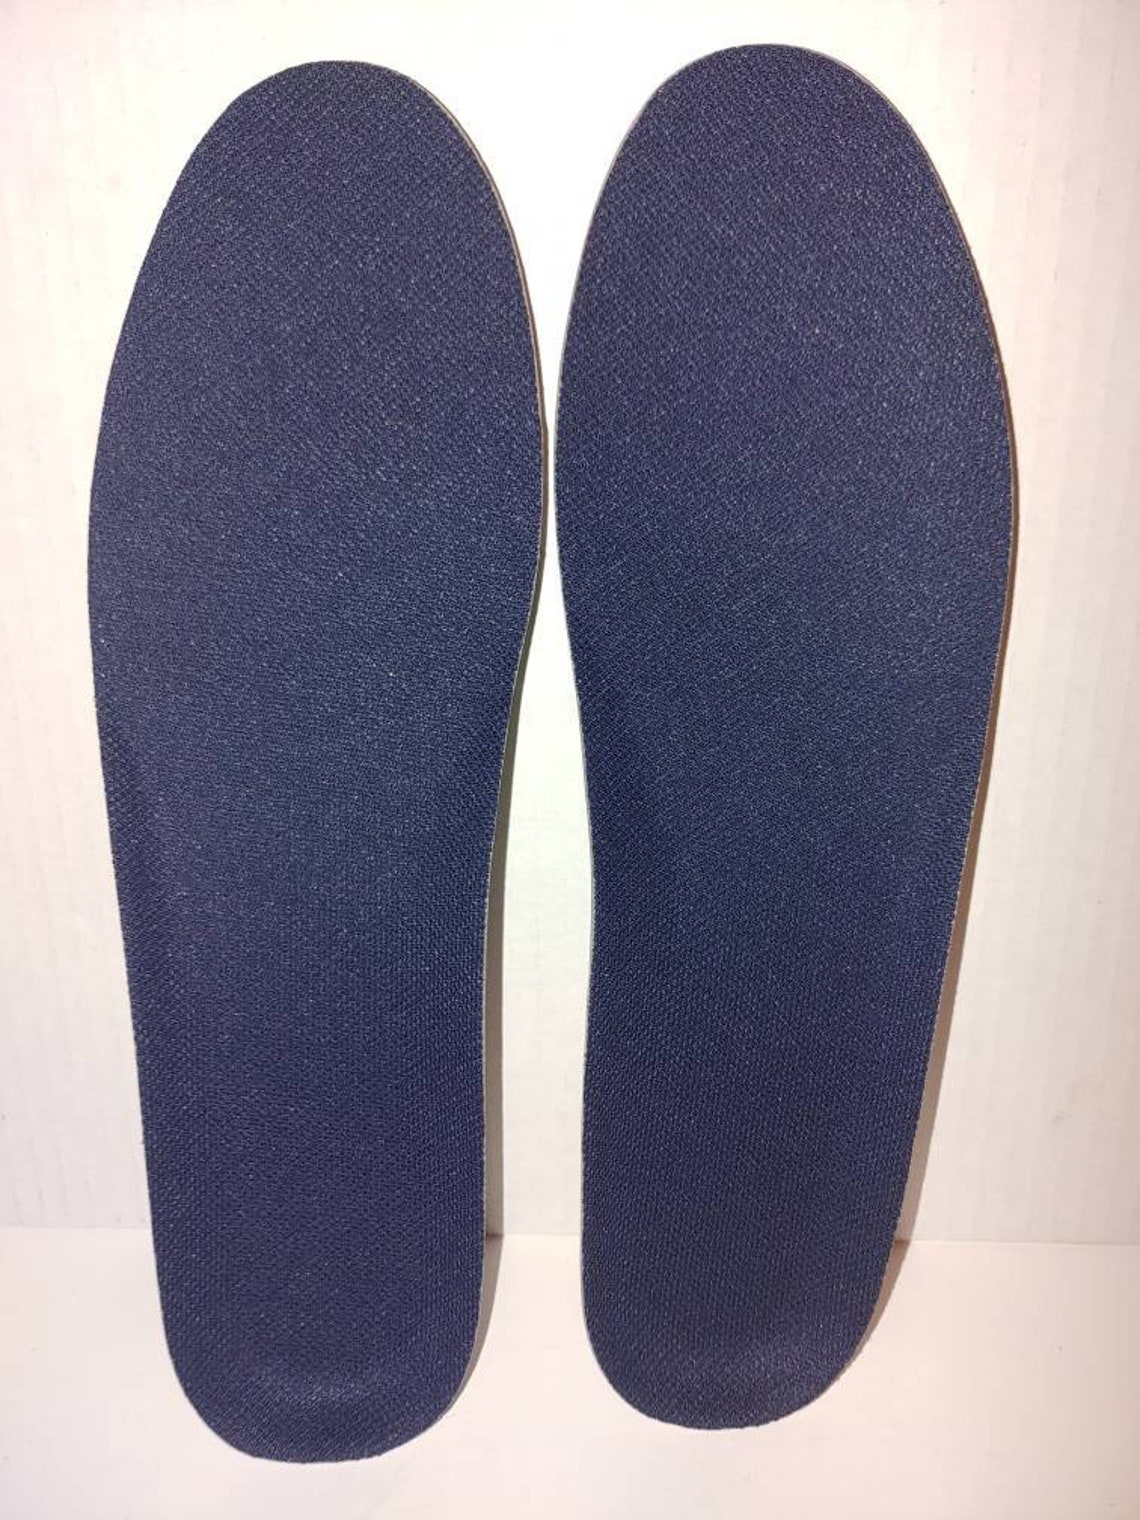 PU Polyurethane insoles for Air Jordan 1 SB's and other | Etsy